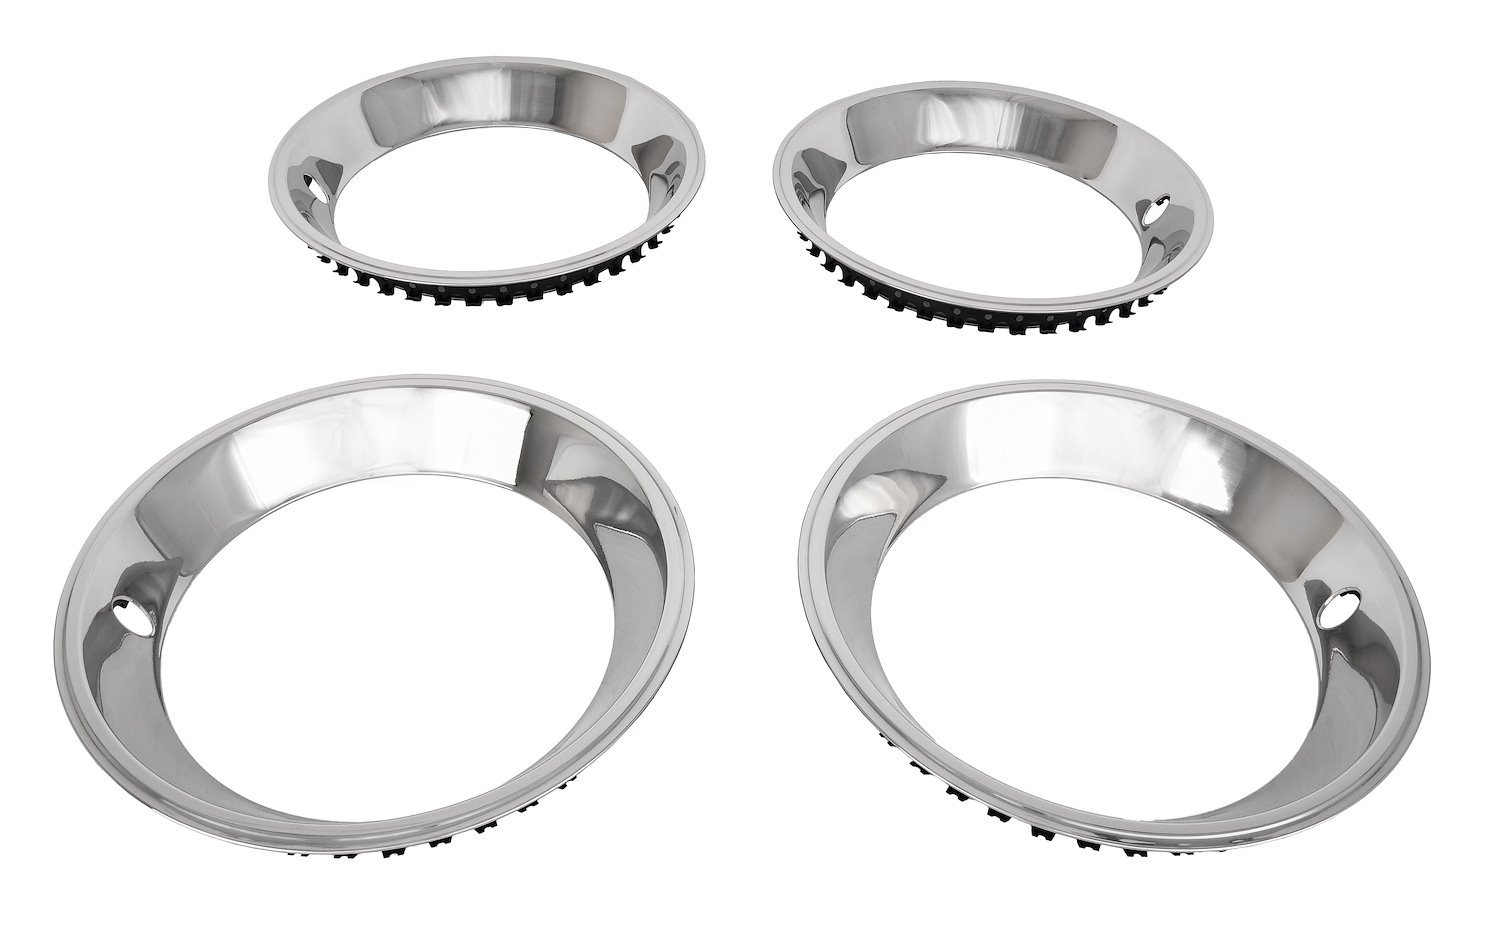 Deep Dish Trim Ring Set w/Stopped Edge for 14 in. x 7 in. Wheels [2.250 in. D x 2.500 in. W]